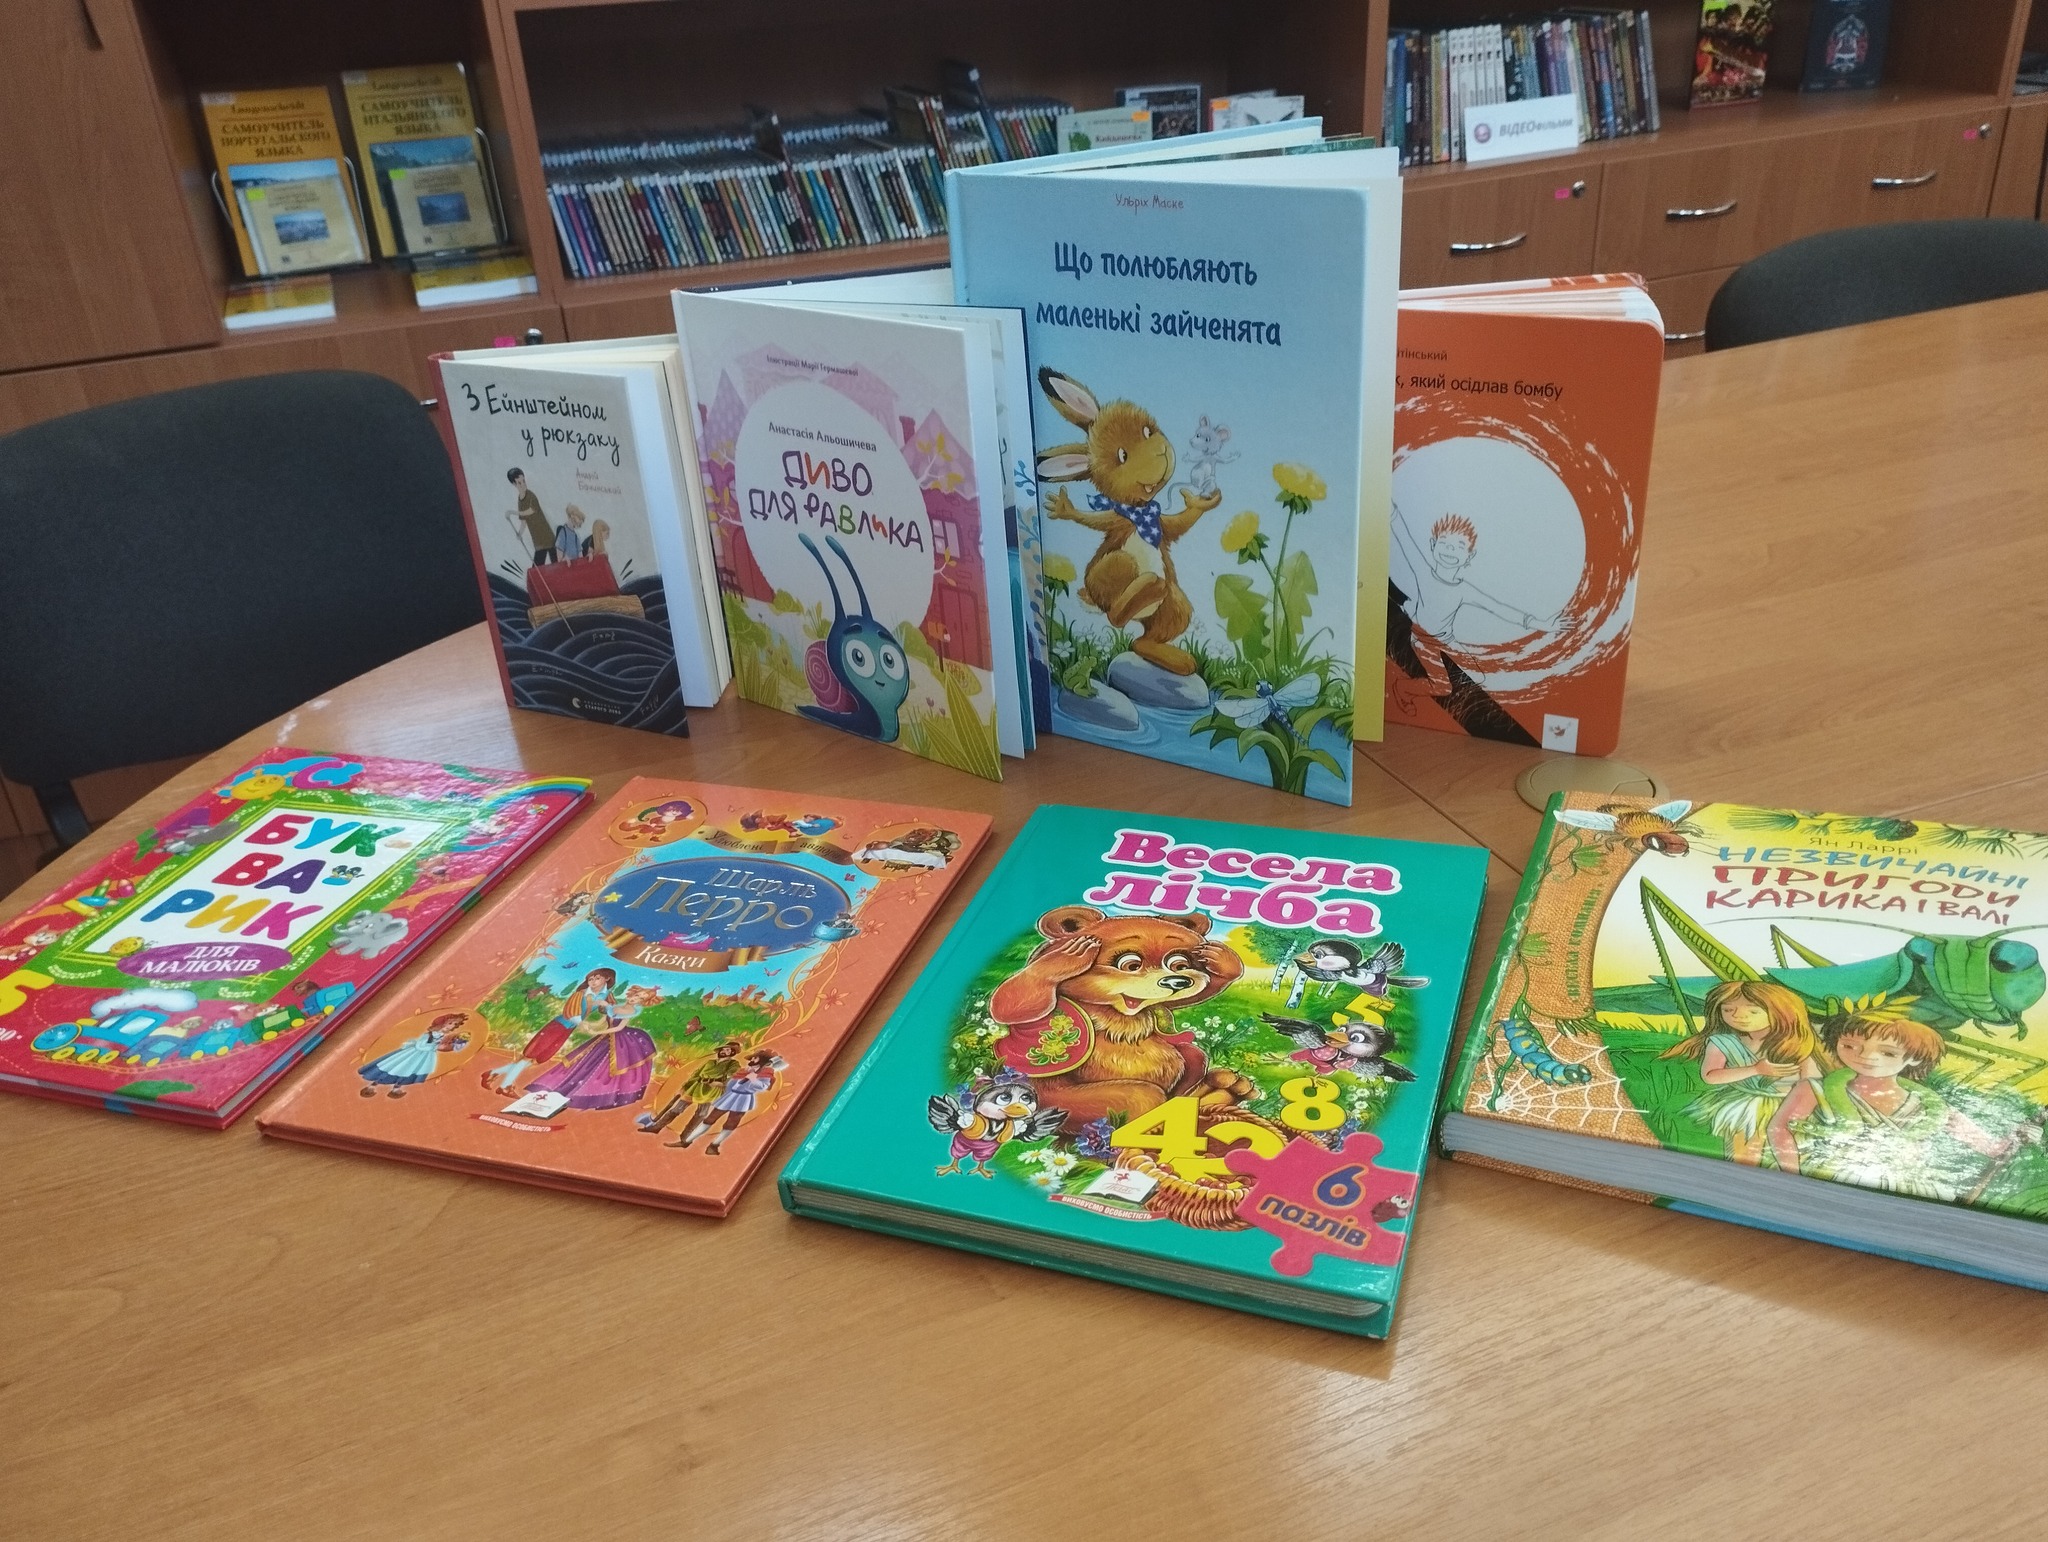 On the occasion of the International Children's Day, the enterprise "NIBULON" donated a batch of children's literature to the book fund of the Central library